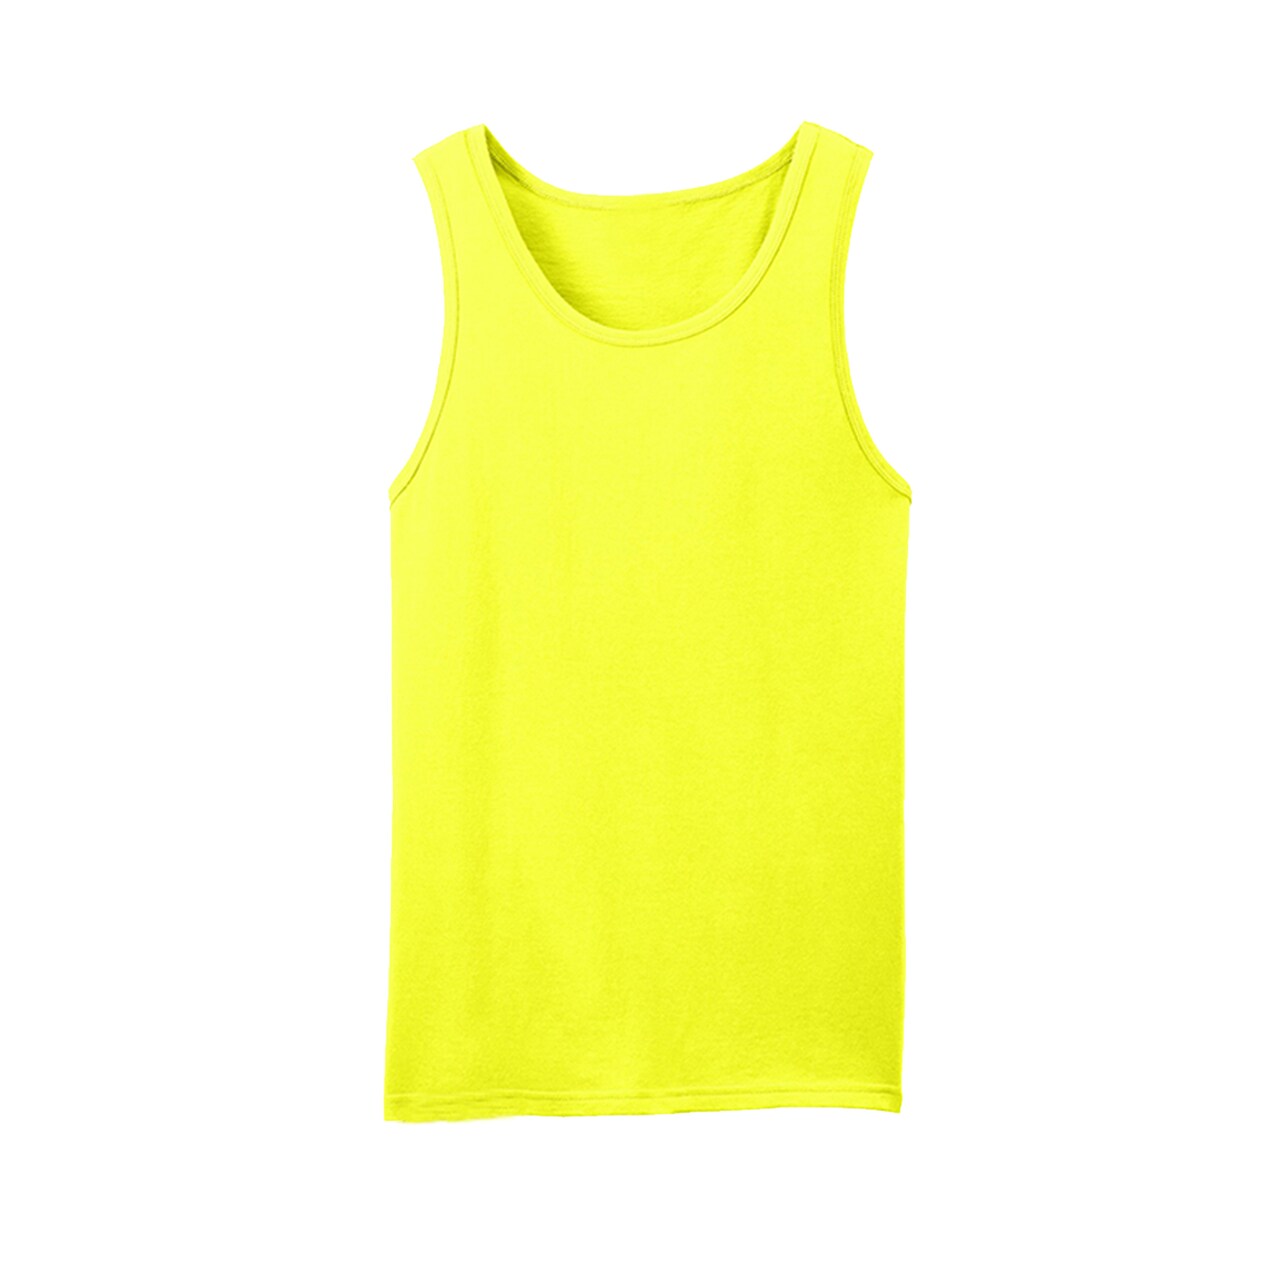 Men's Cool and Comfortable Tank Top. Stylish Tank Top, Ultimate  Performance Men's Tank Top, Breathable M0oisture-wicking Athletic  Sleeveless Gym Fitness for men, RADYAN®